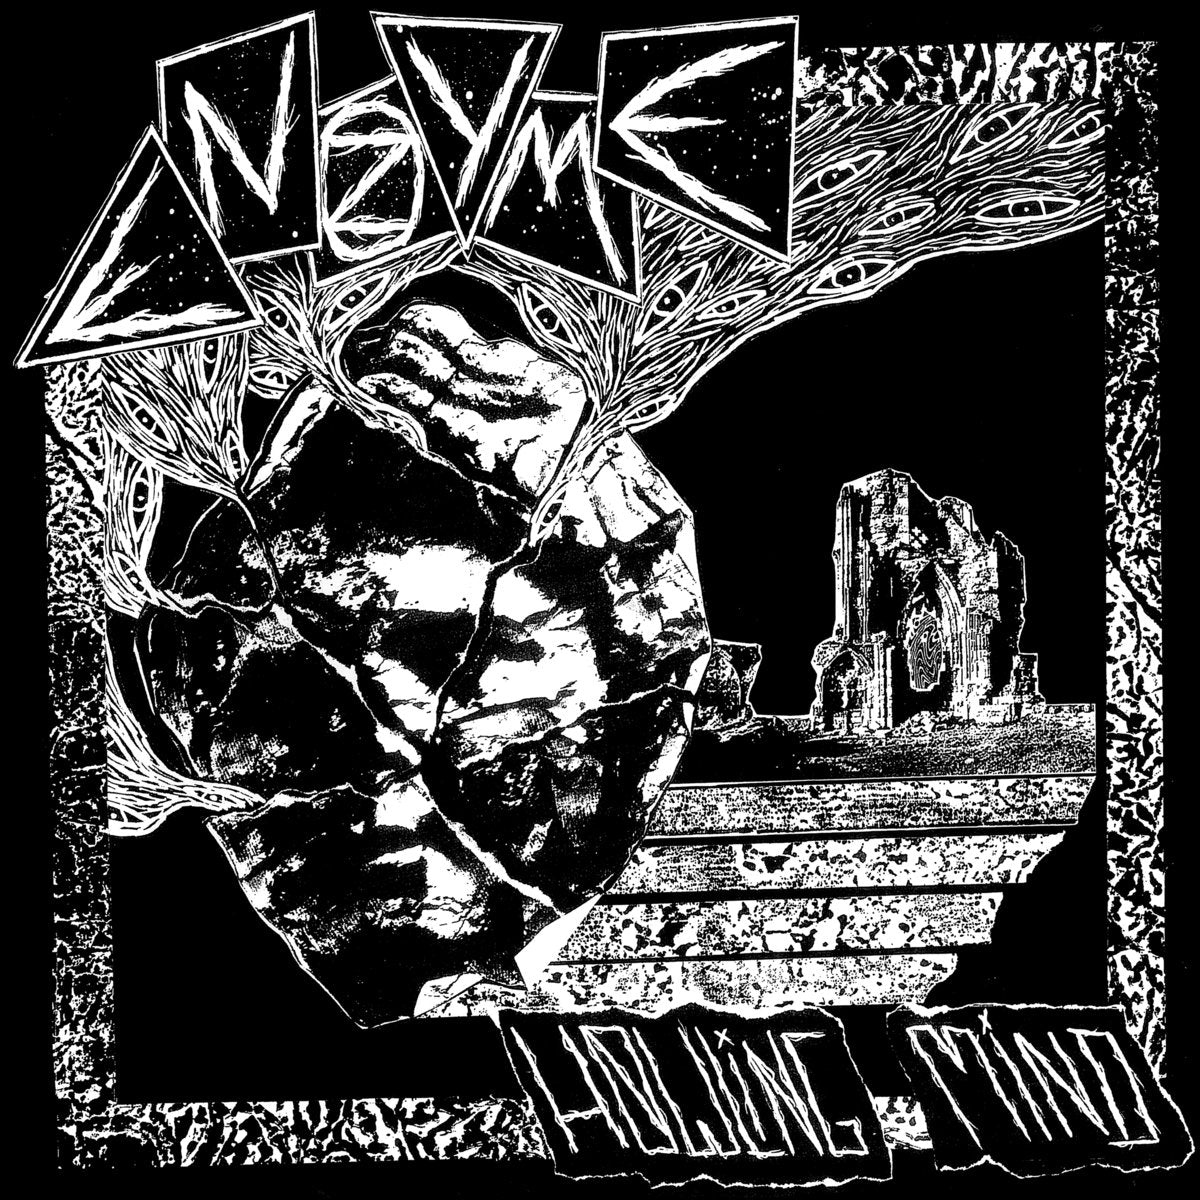 ENZYME - "HOWLING MIND" LP